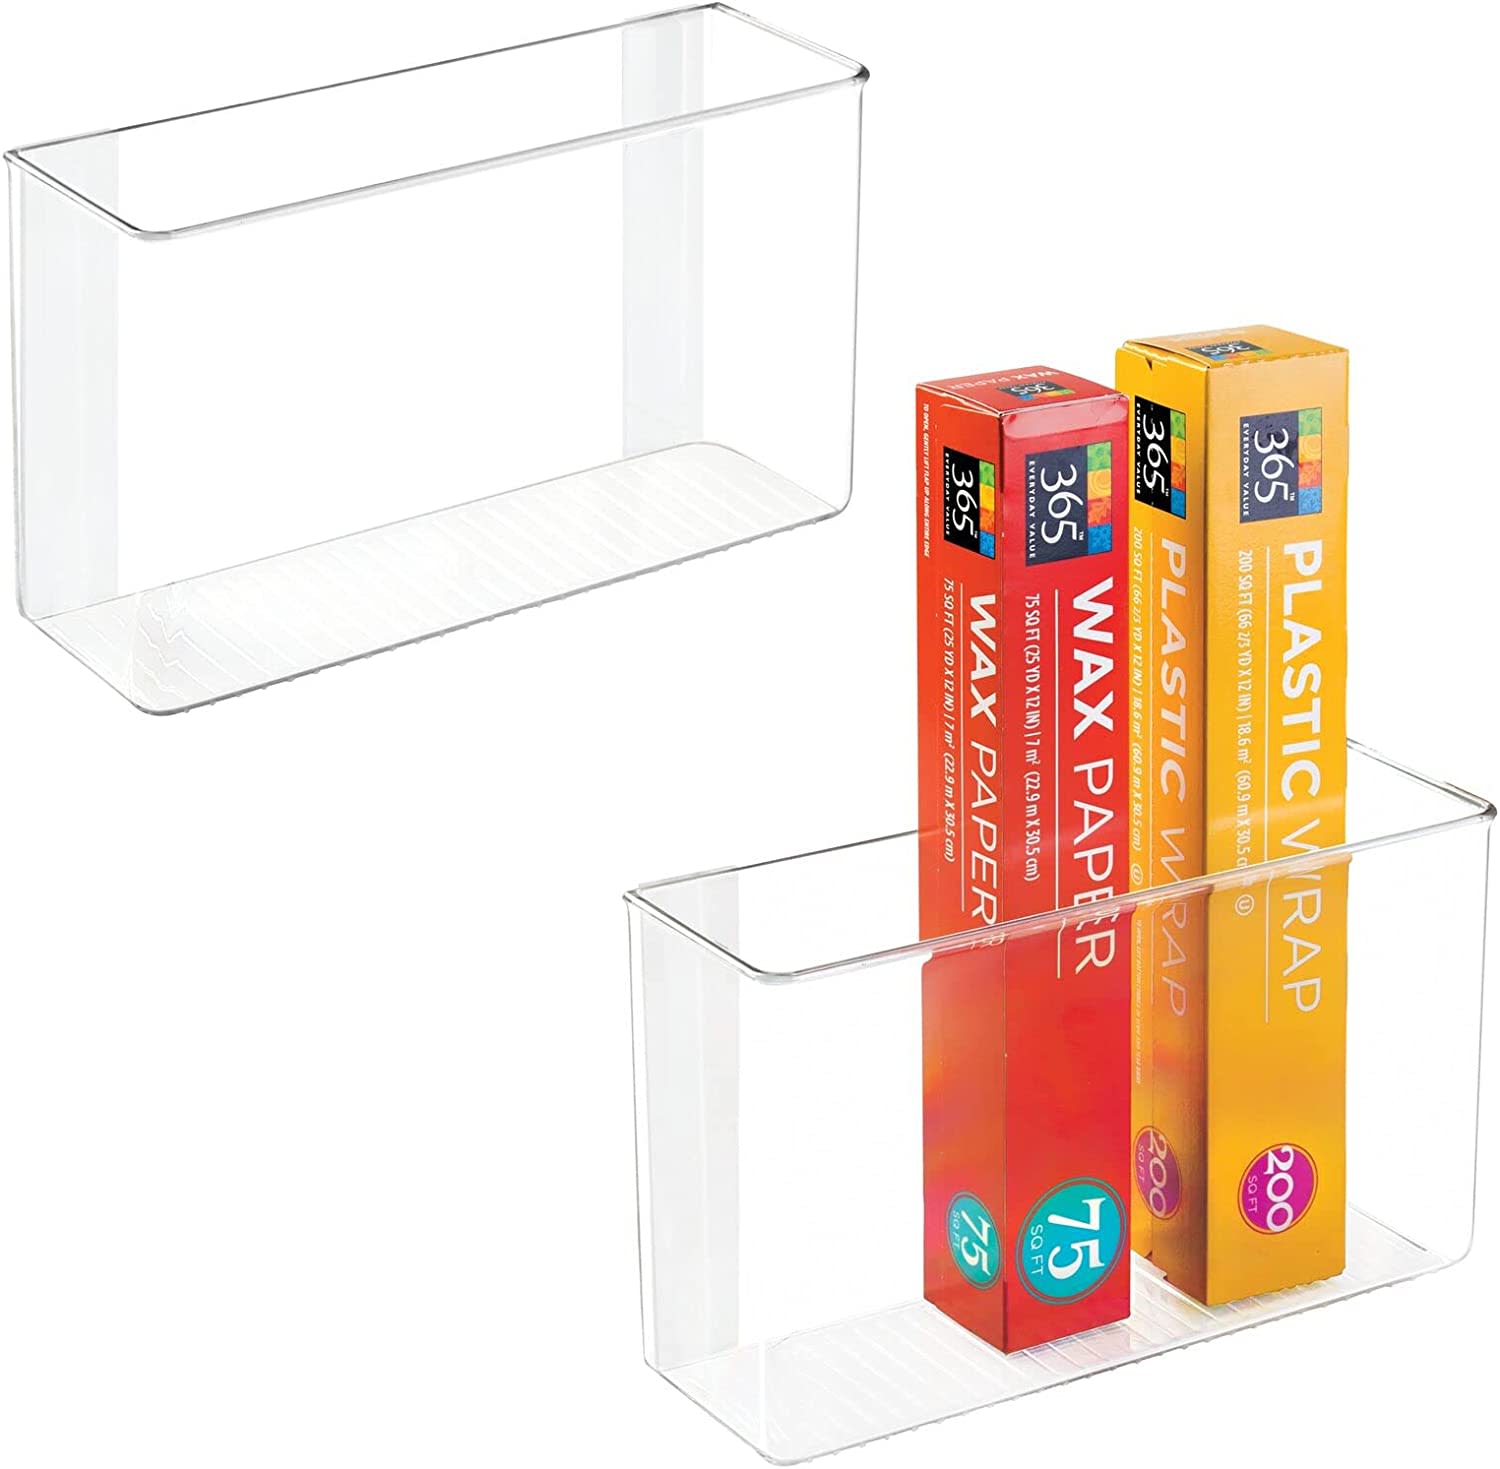 9 Plastic Wrap & Foil Organizers to Contain Clutter In Your